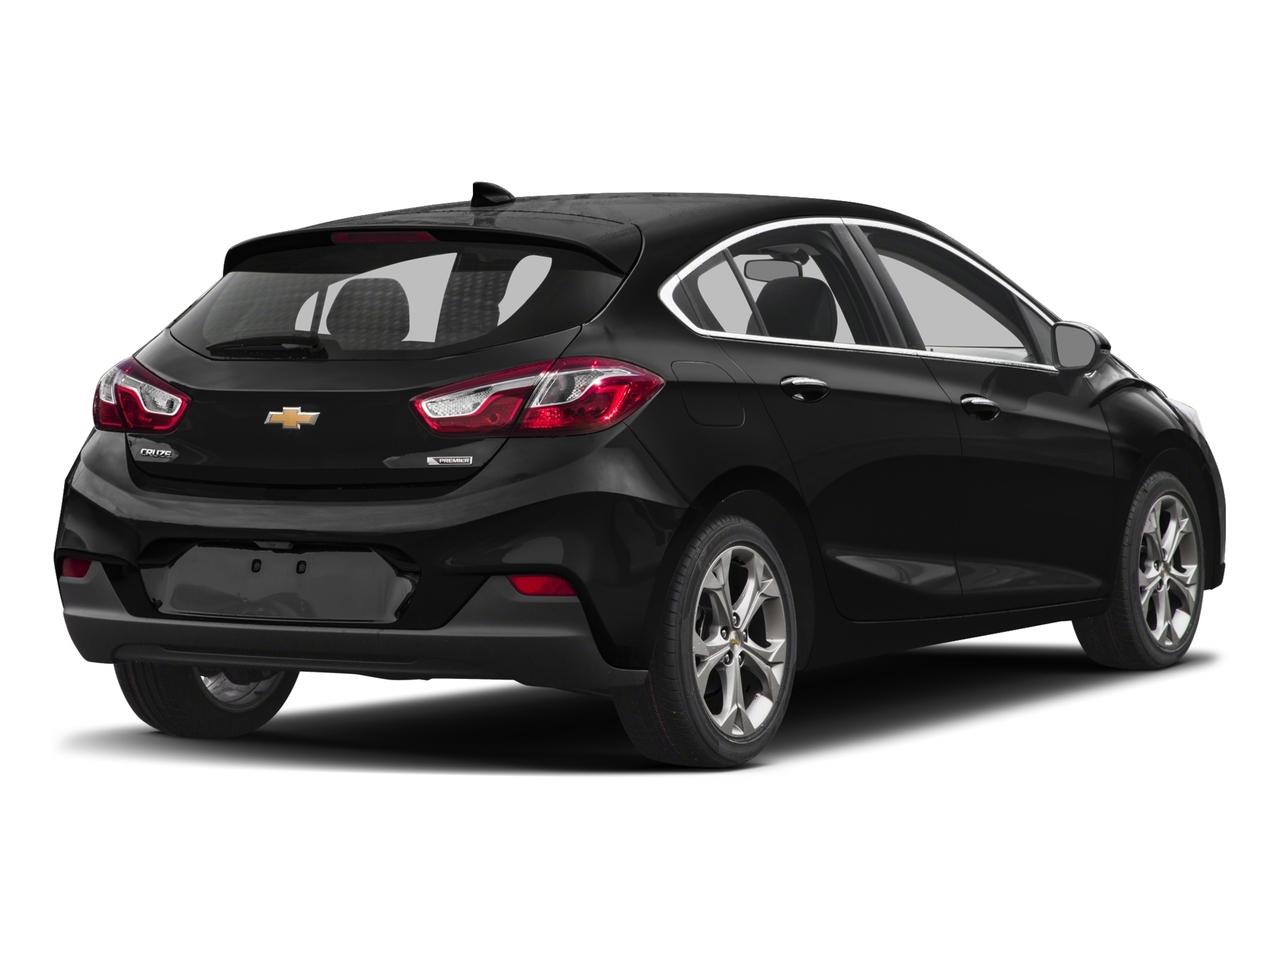 2017 Chevrolet Cruze Vehicle Photo in Ft. Myers, FL 33907